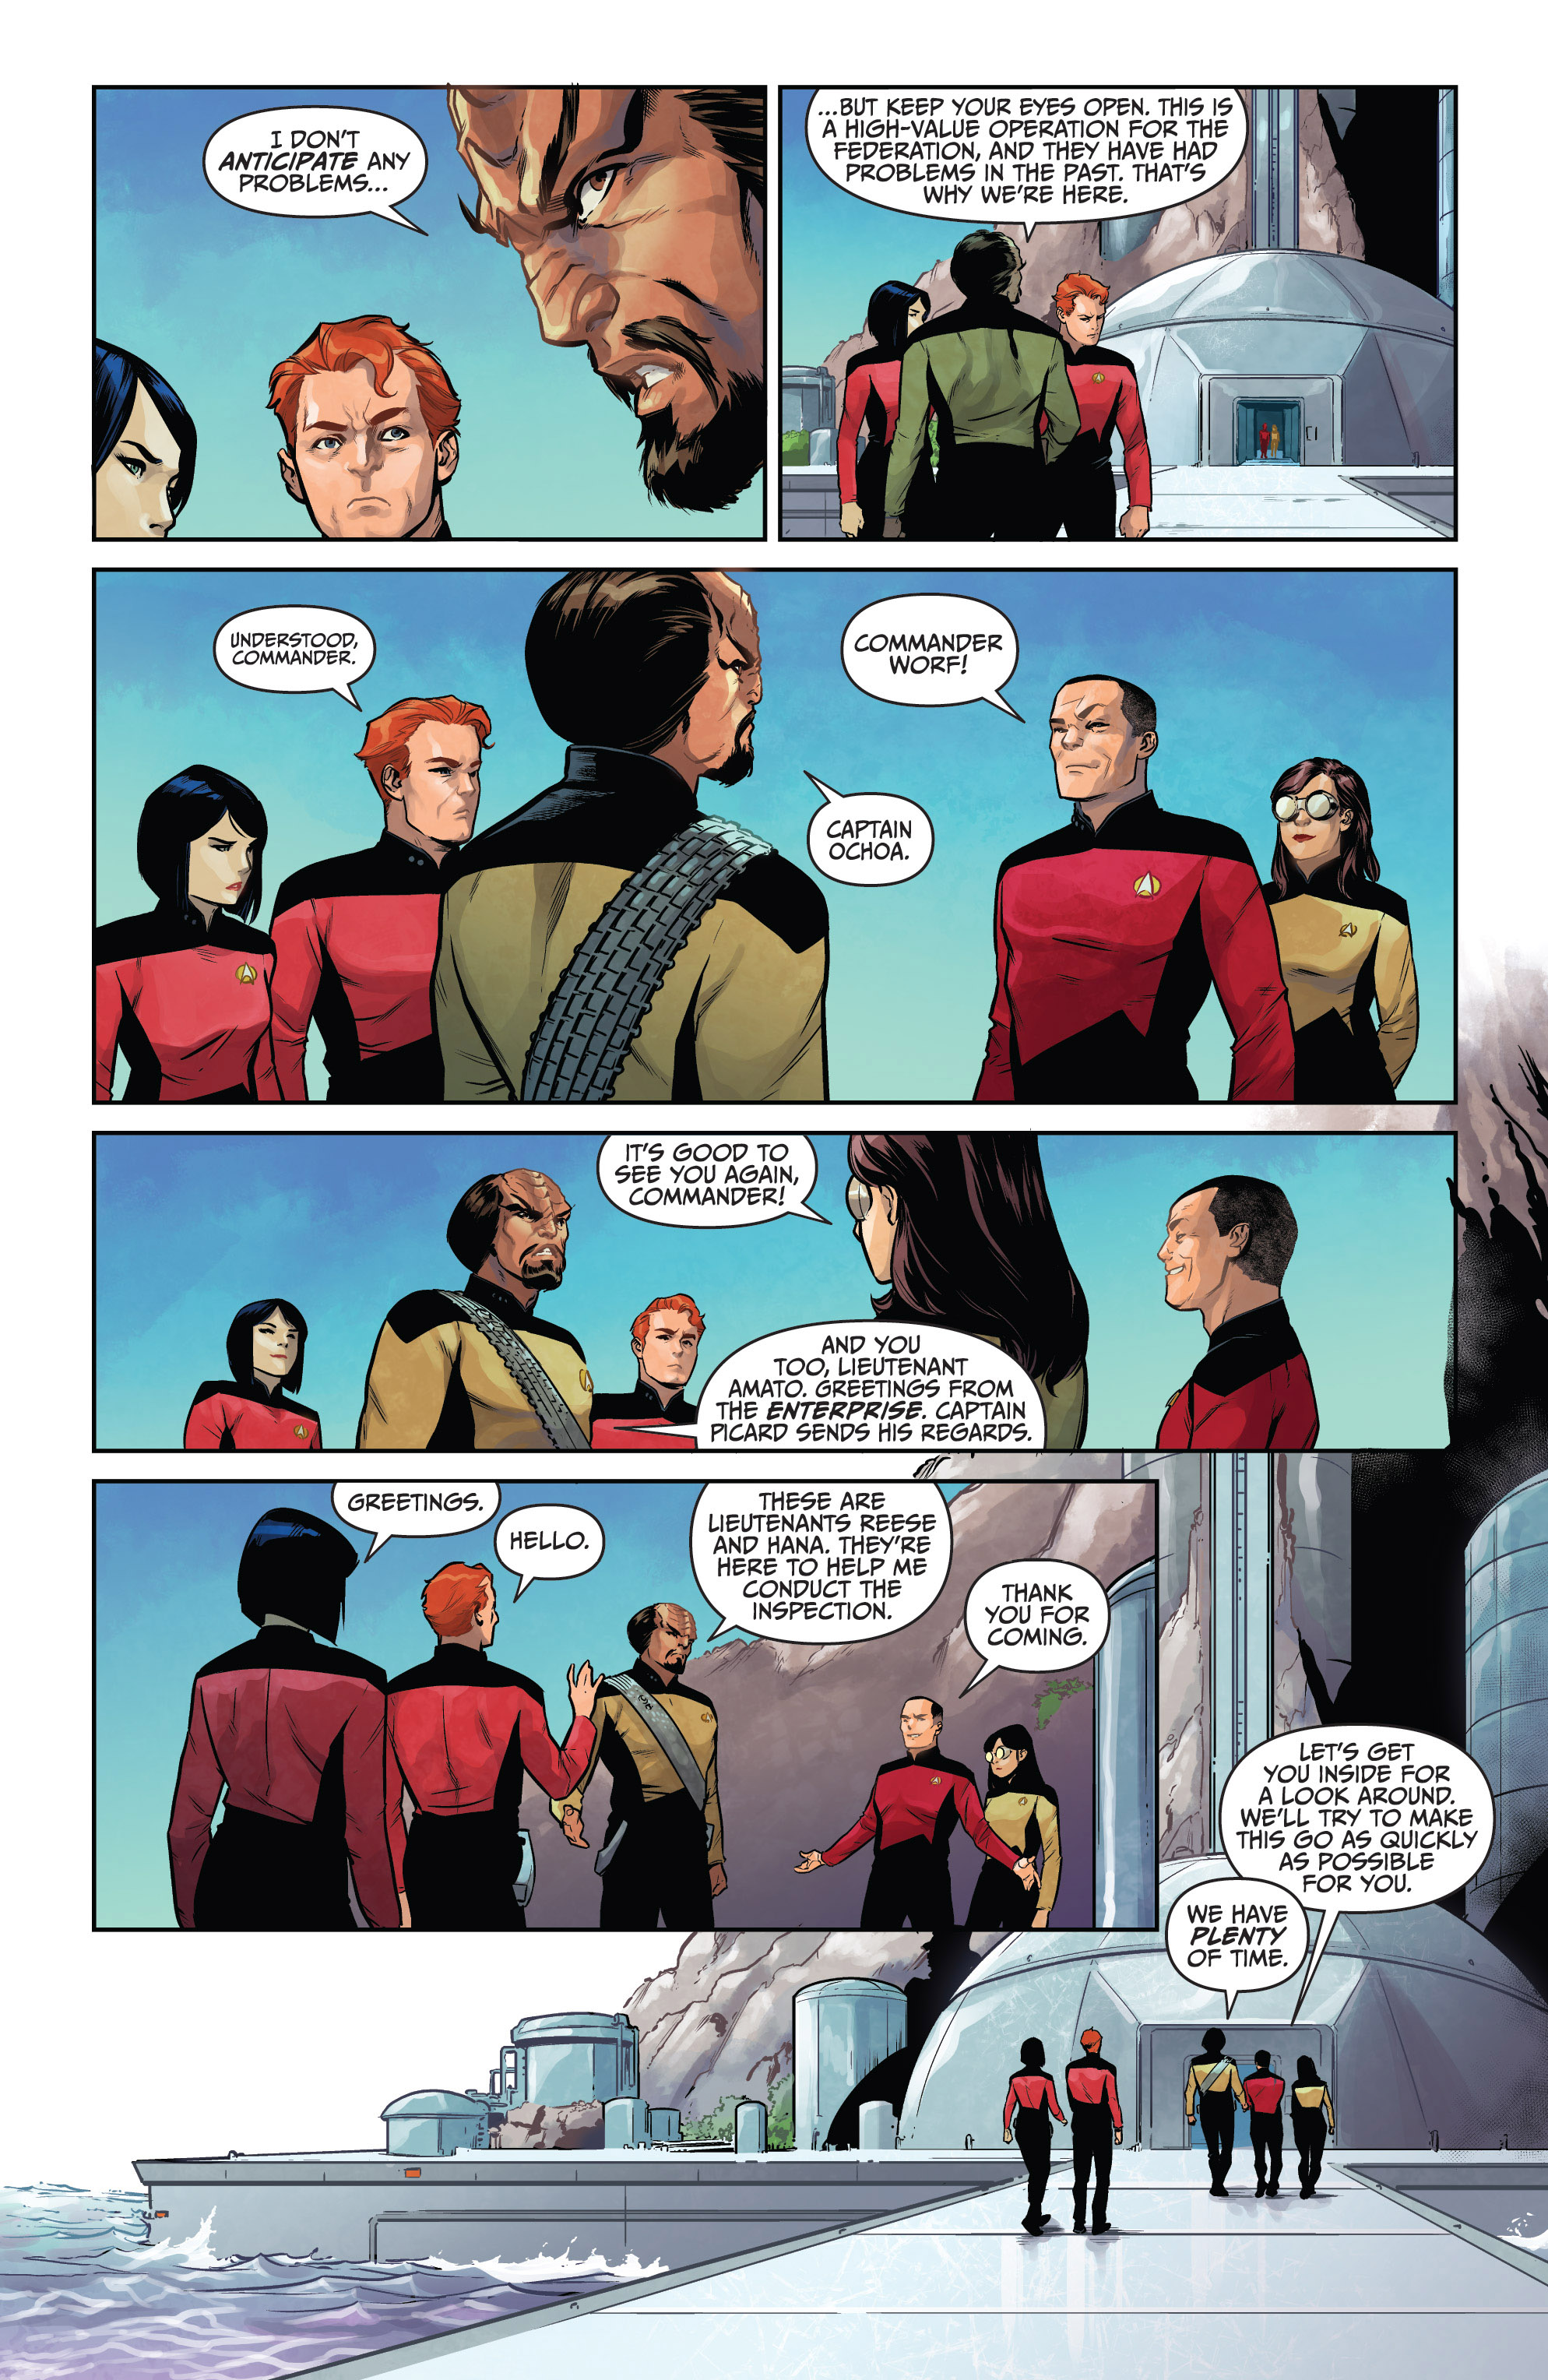 Star Trek: The Next Generation: Through The Mirror (2018-): Chapter 1 - Page 4